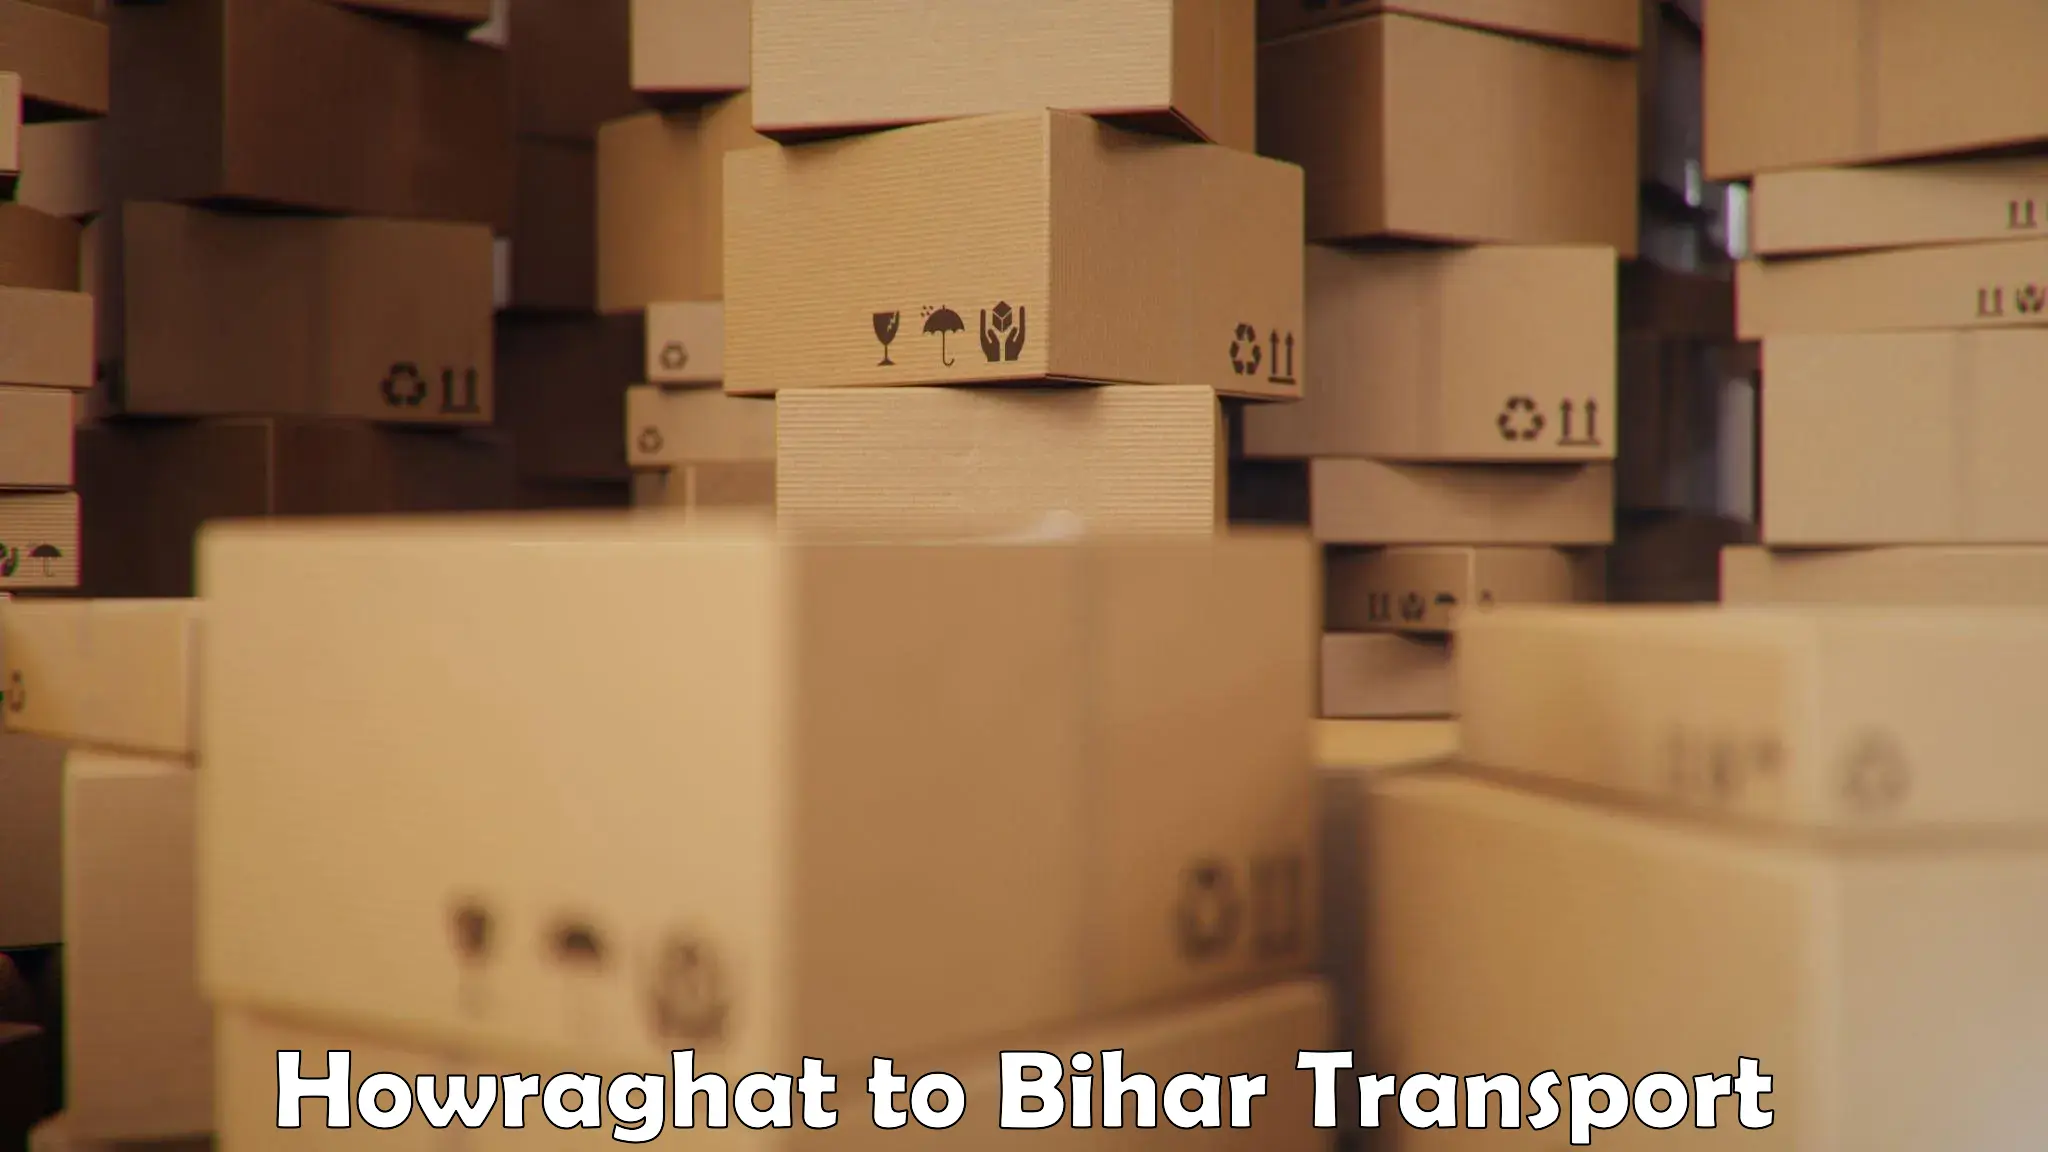 Container transport service Howraghat to Bettiah